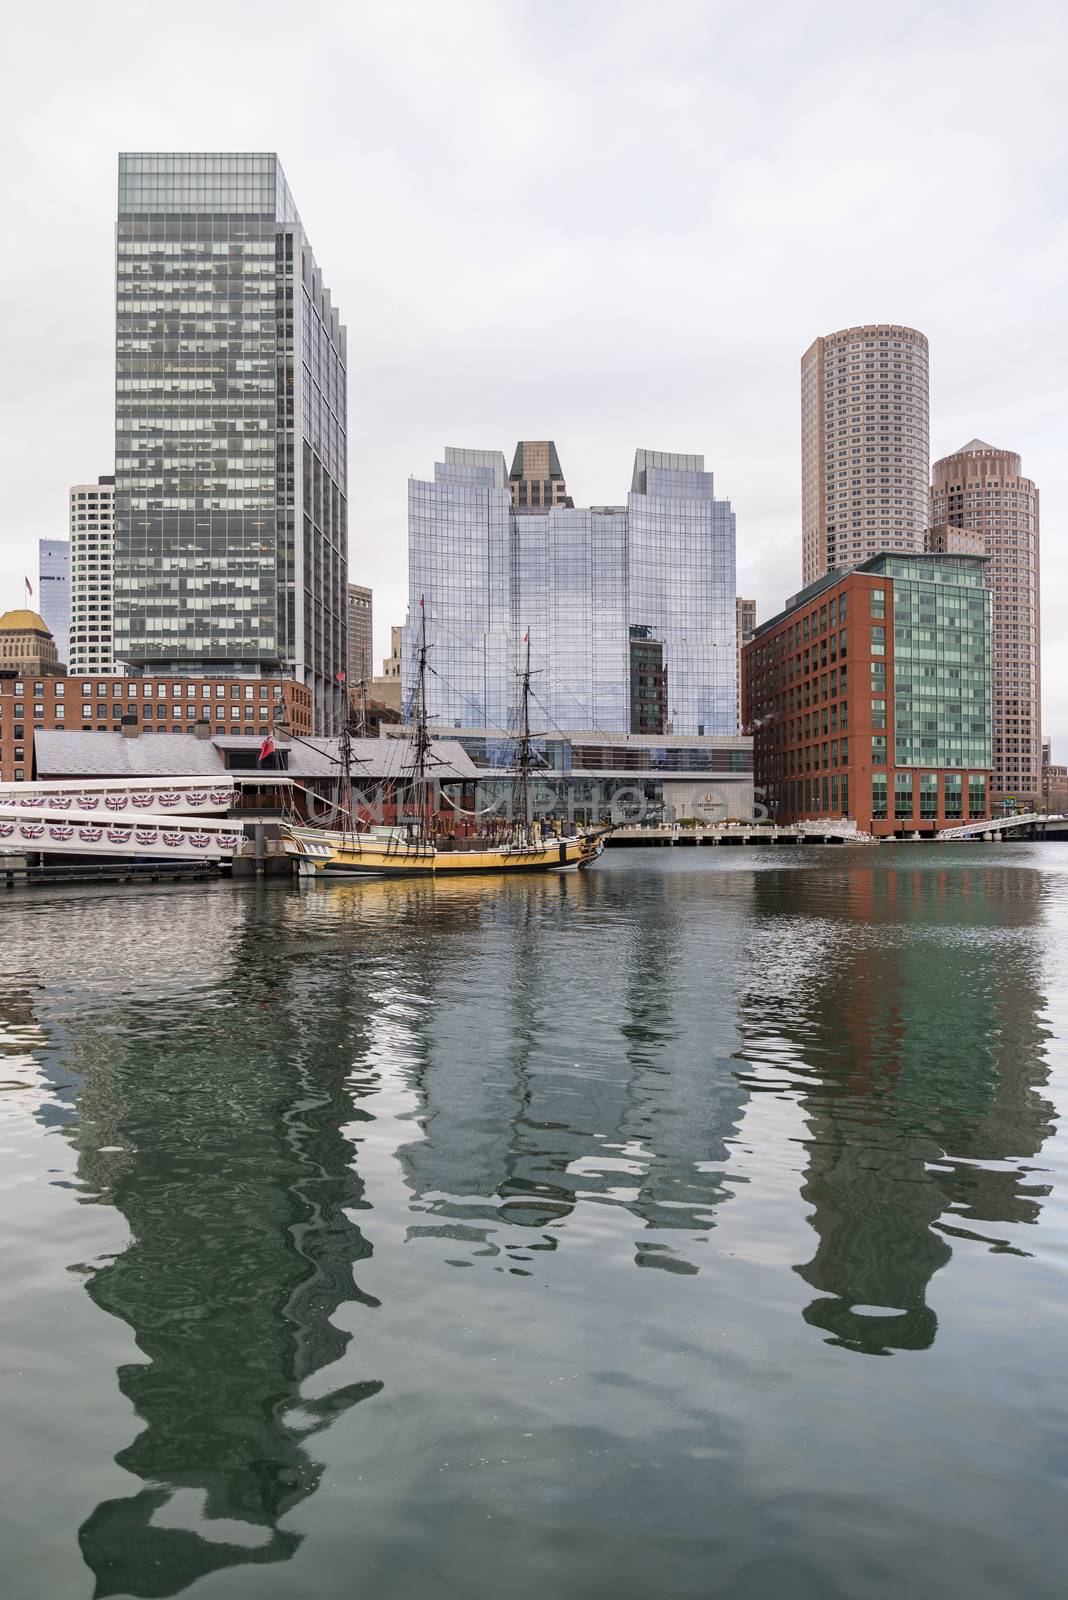 BOSTON - DECEMBER 13: Portrait of Downtown financial district  on December 13, 2015 in Boston, MA USA